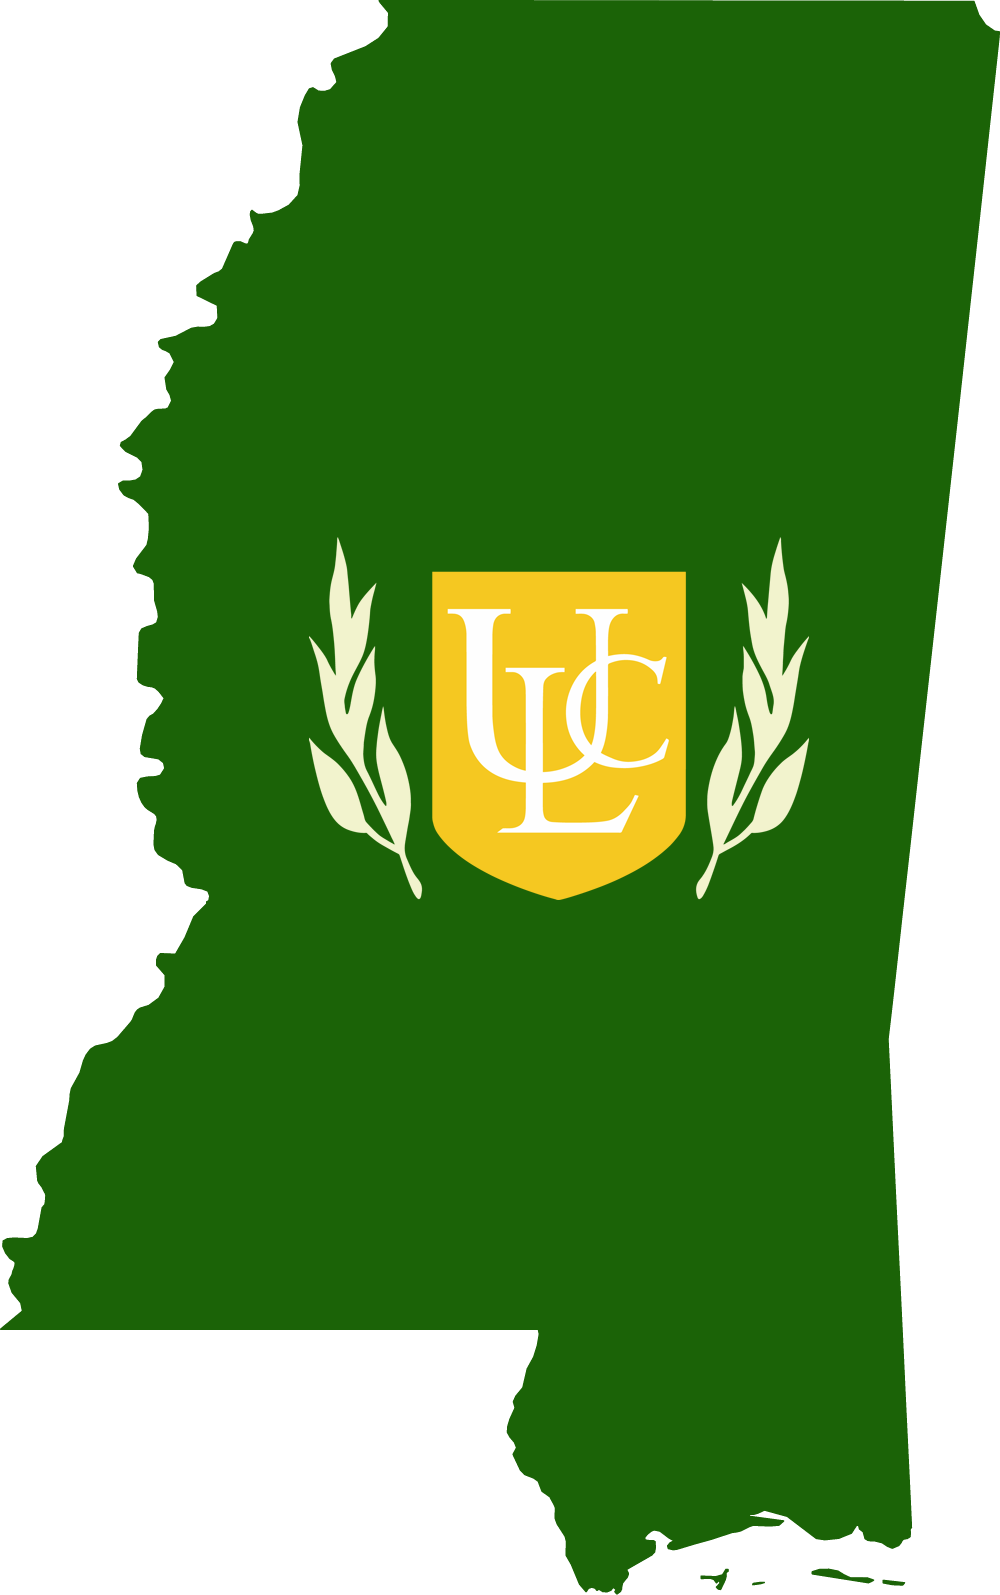 An outline of MS with the ULC logo